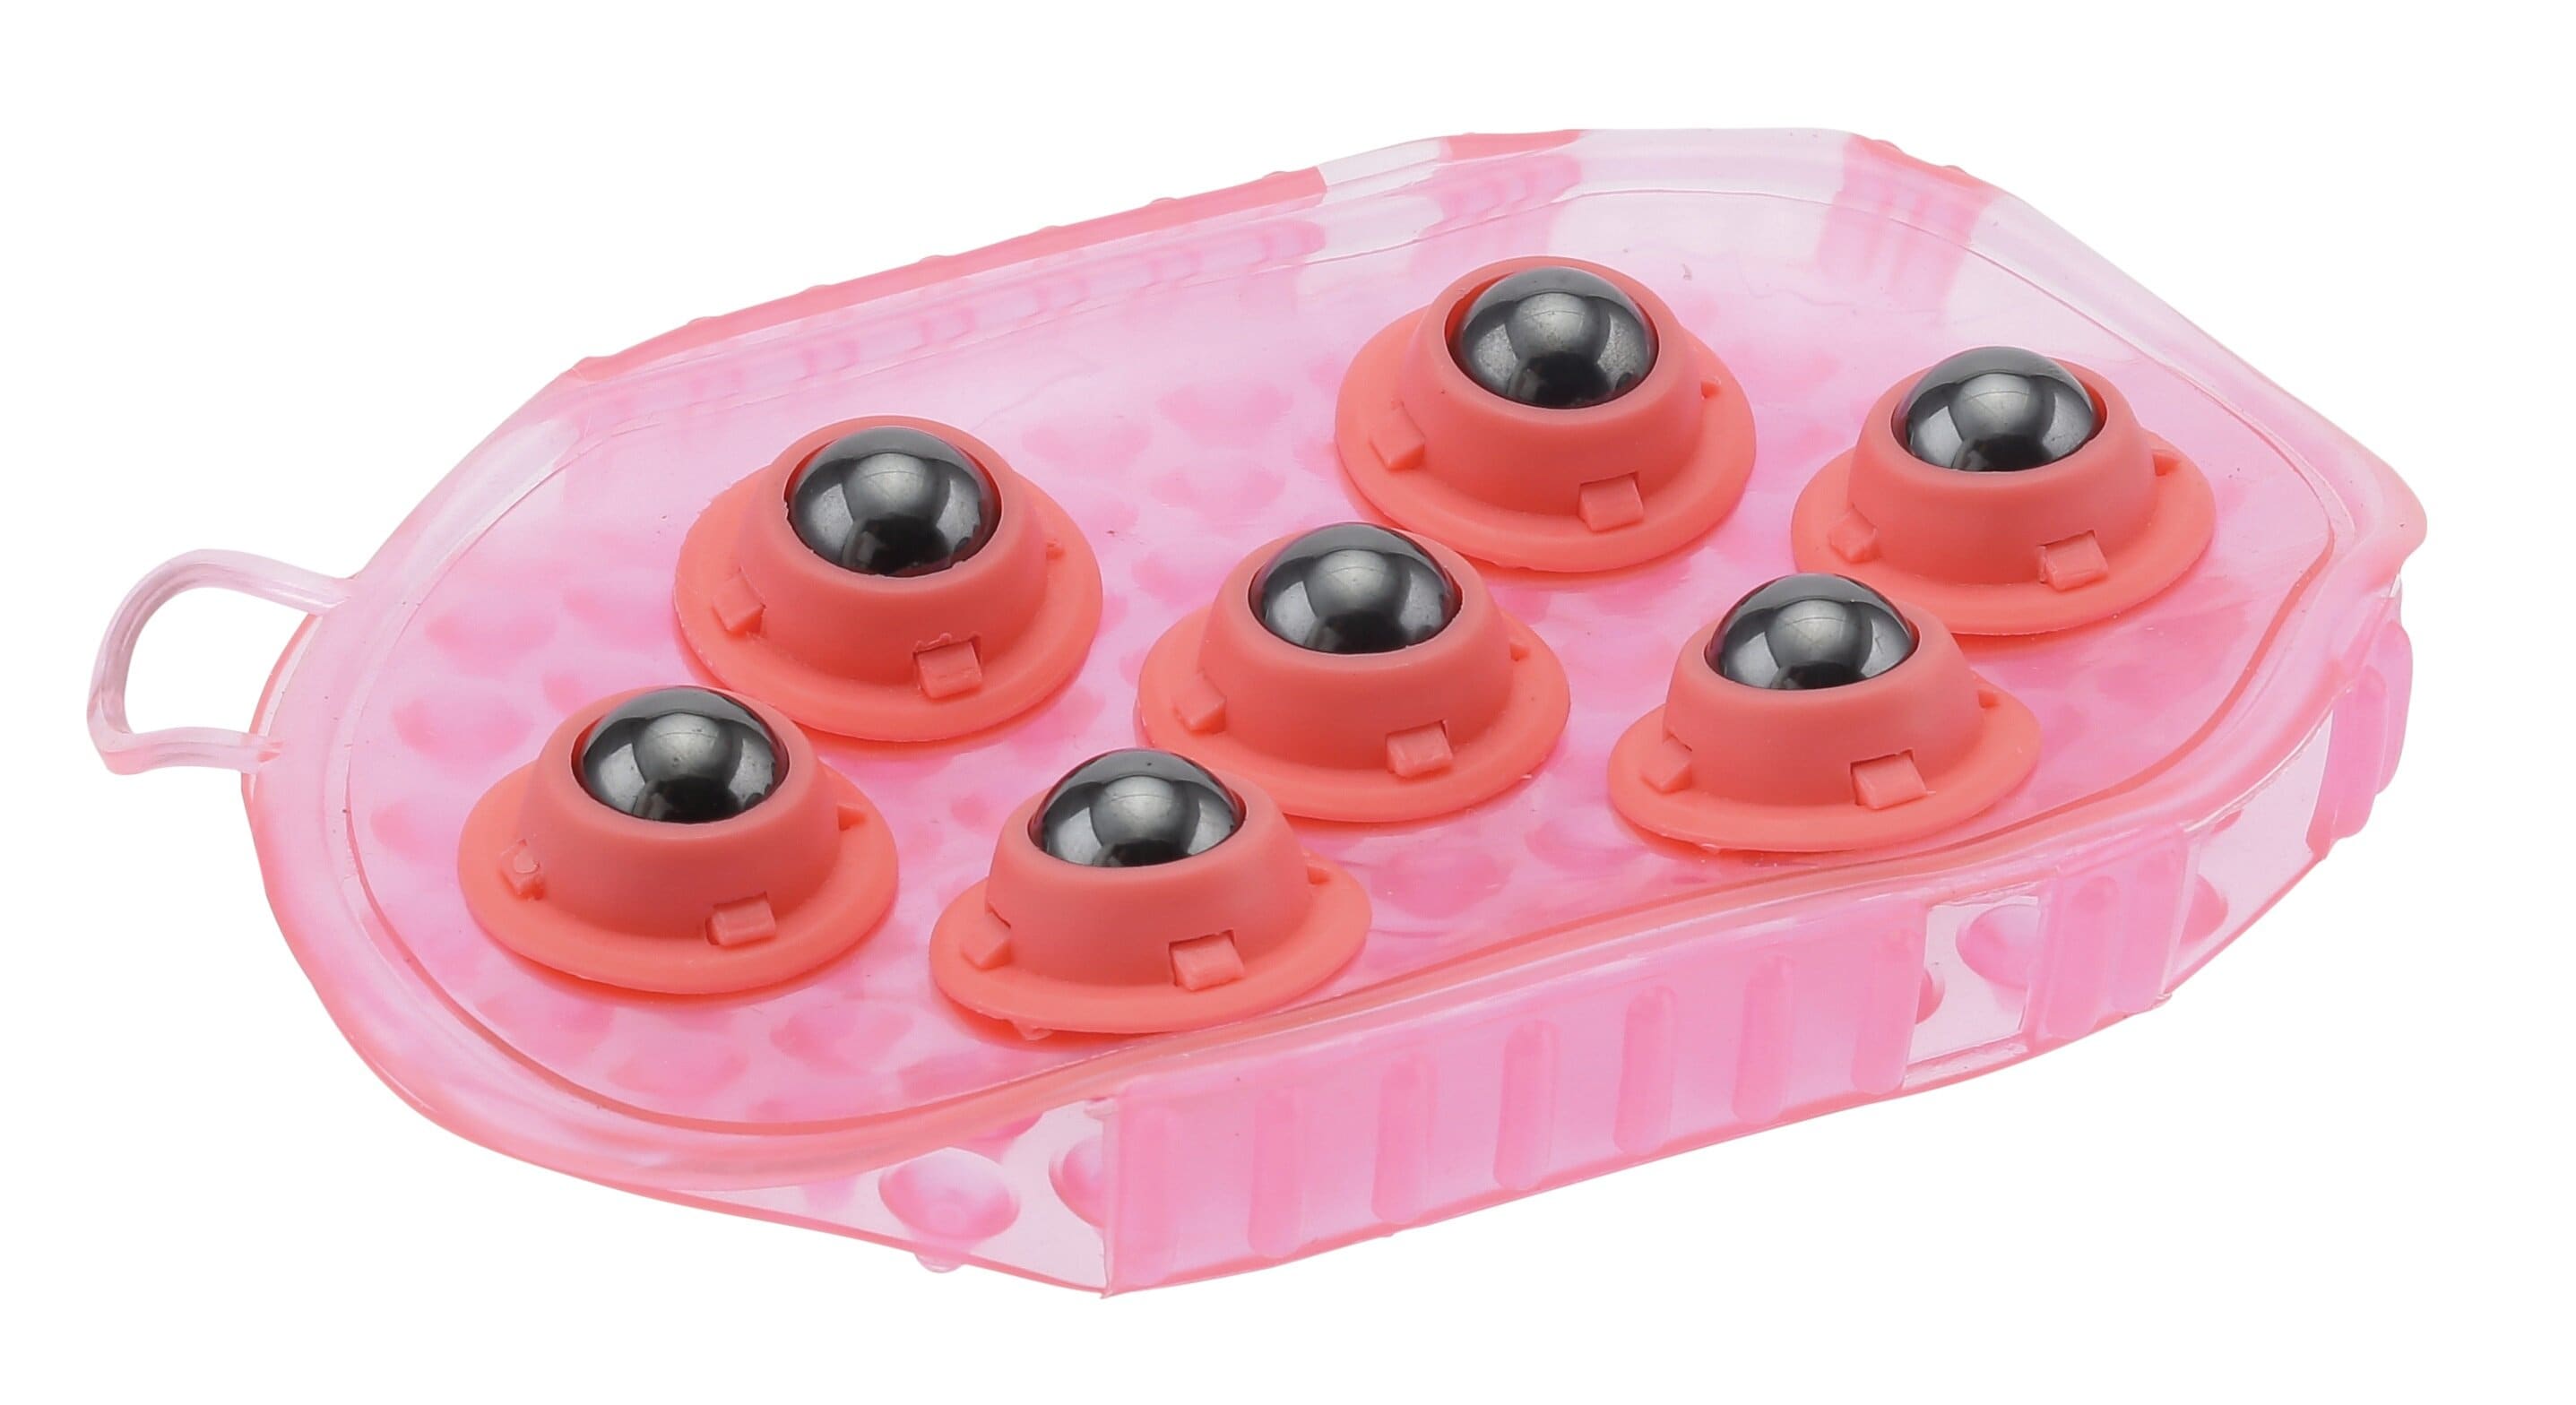 Massage curry comb - Pink